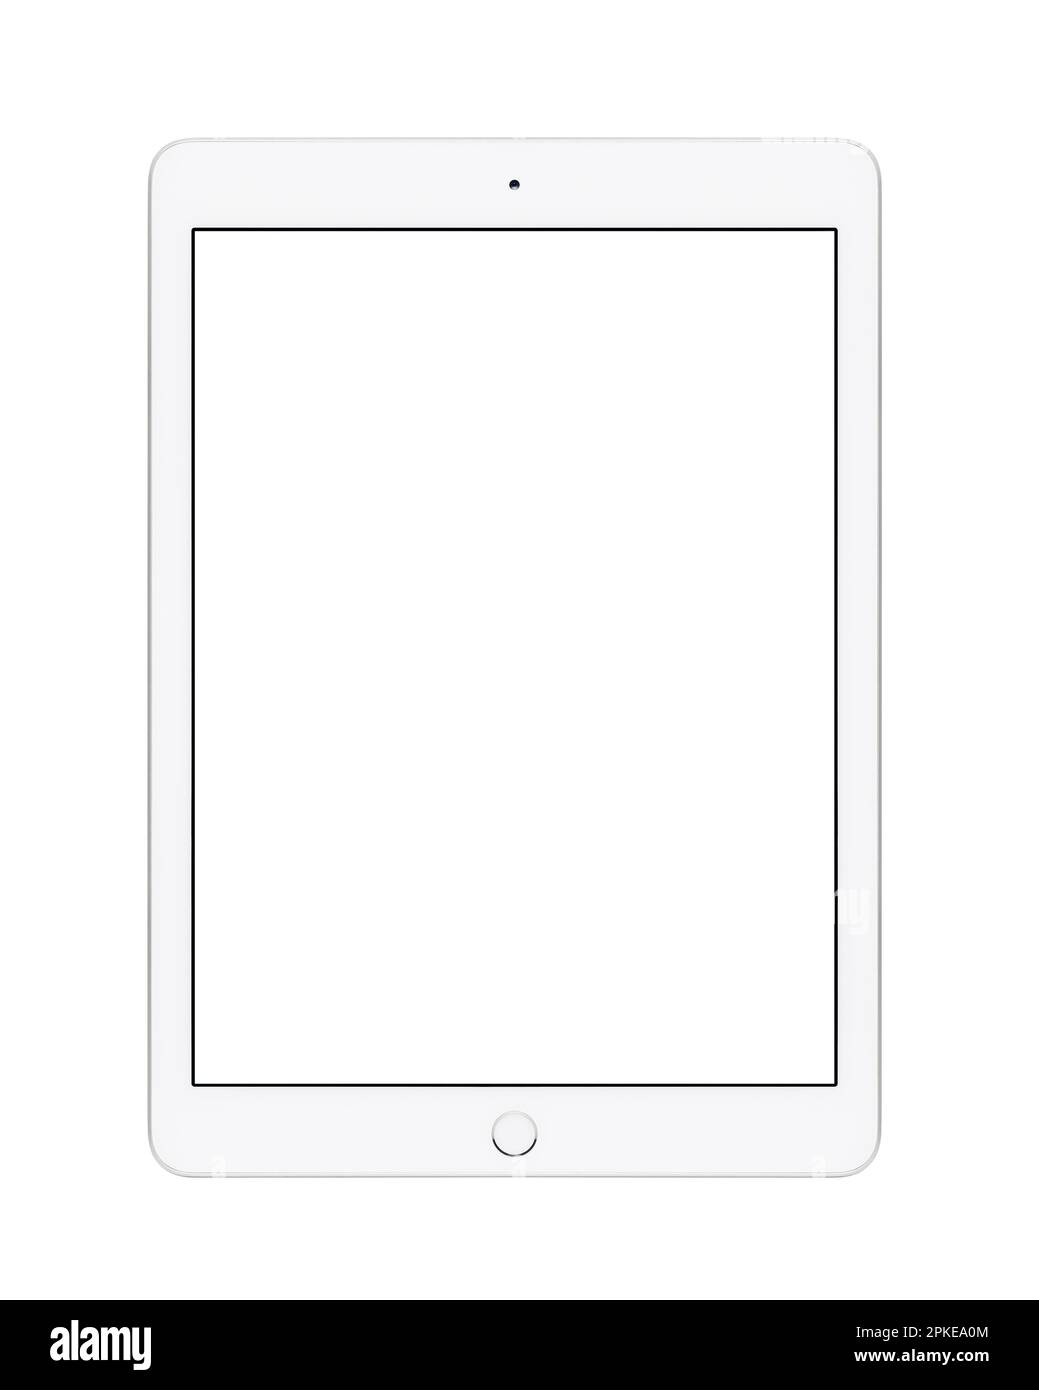 Ipad cut out with a blank screen against a white background Stock Photo